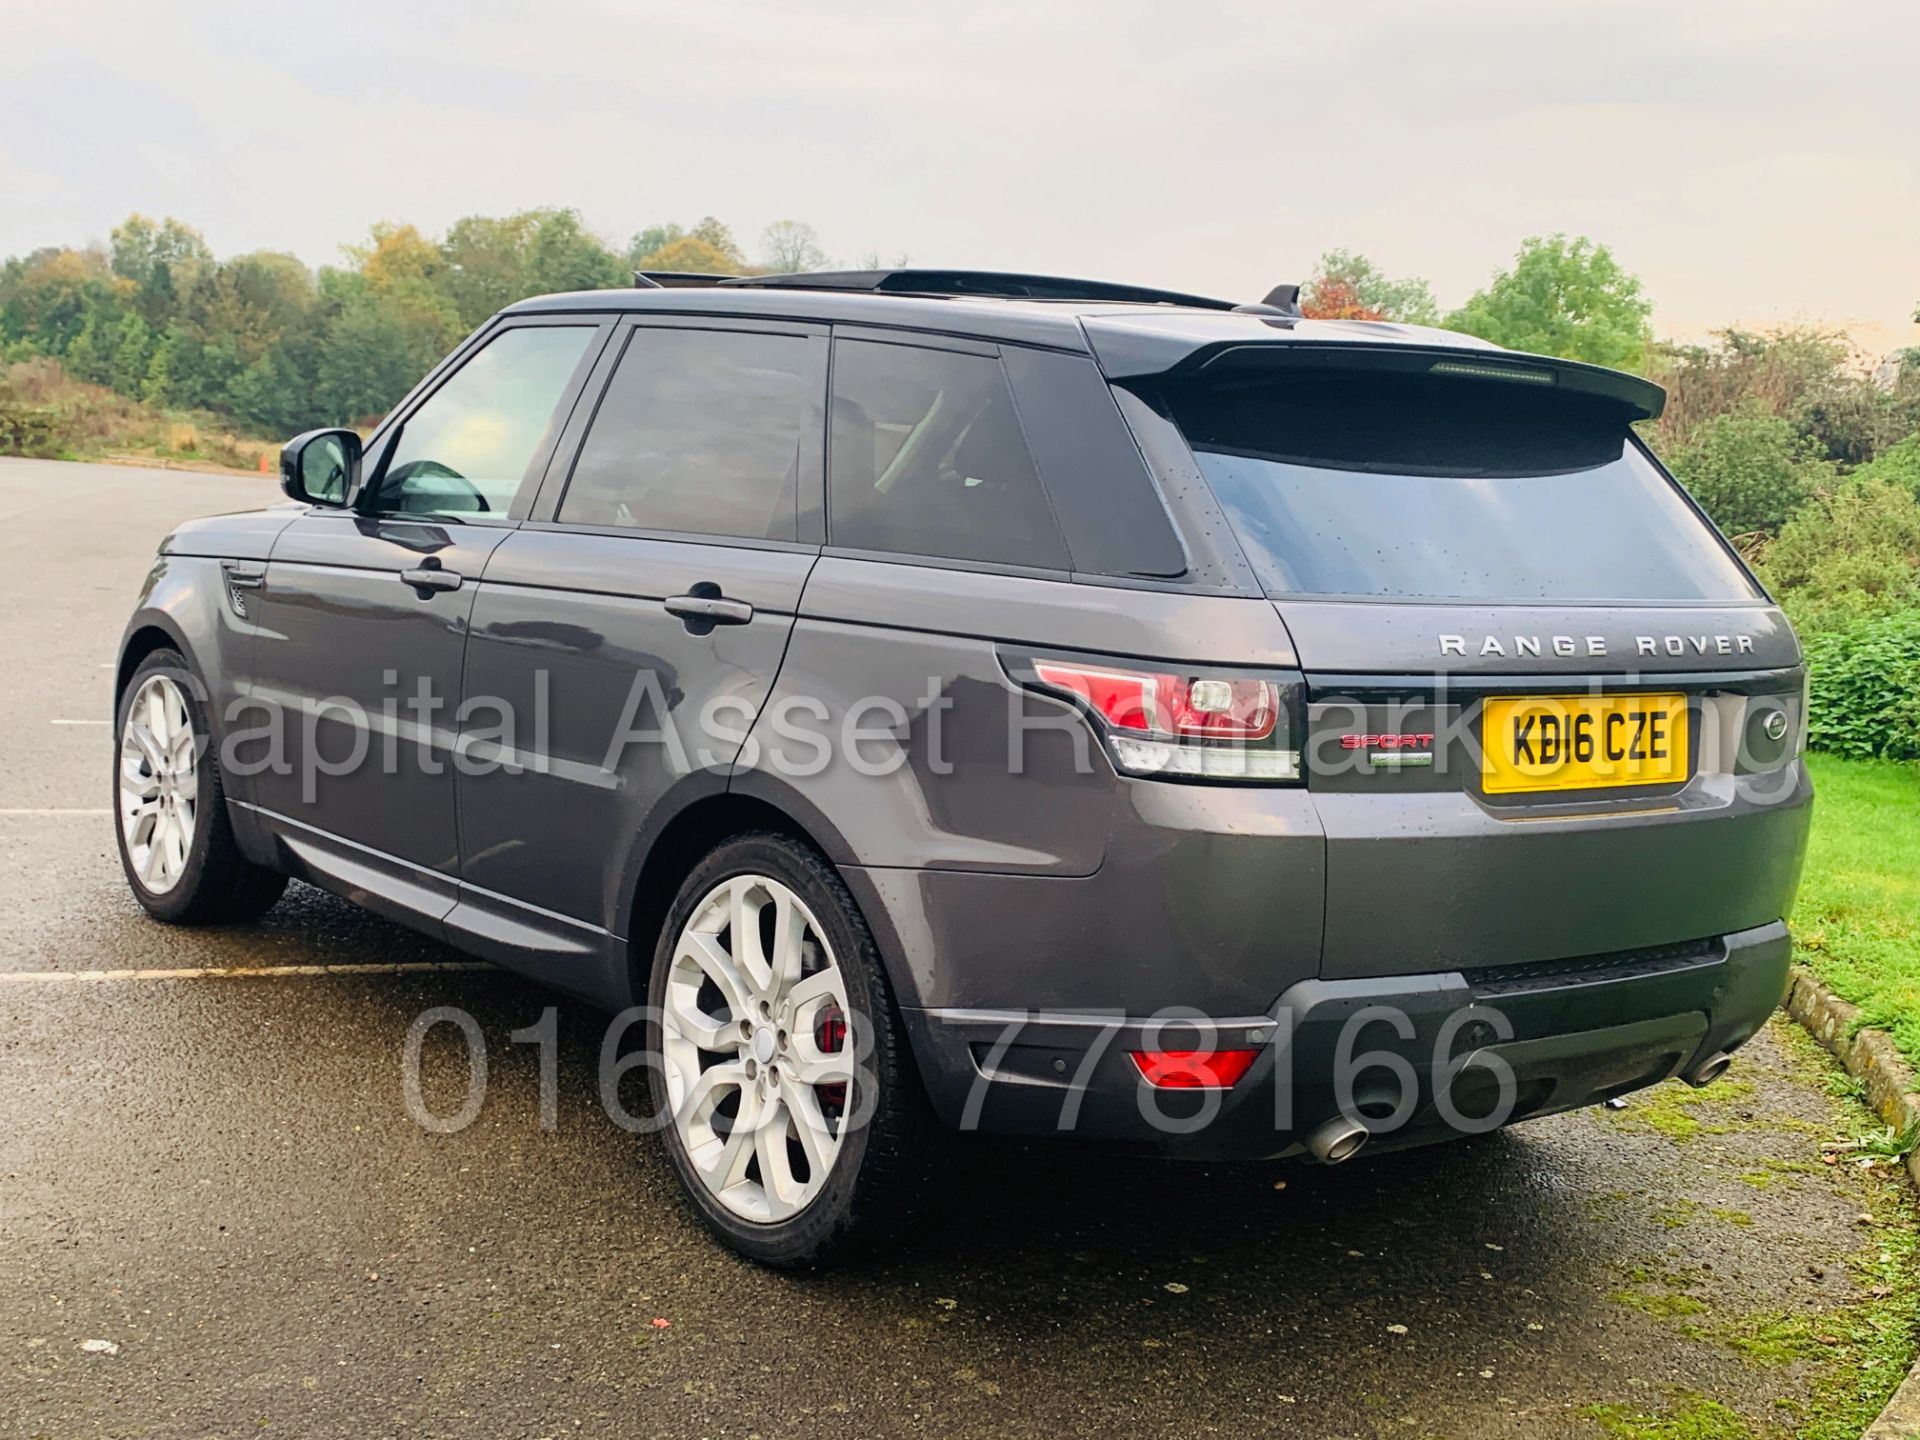 (ON SALE) RANGE ROVER SPORT "AUTOBIOGRAPHY DYNAMIC" 3.0 SDV6 AUTO - ULTIMATE SPEC - 16 REG -1 KEEPER - Image 5 of 70